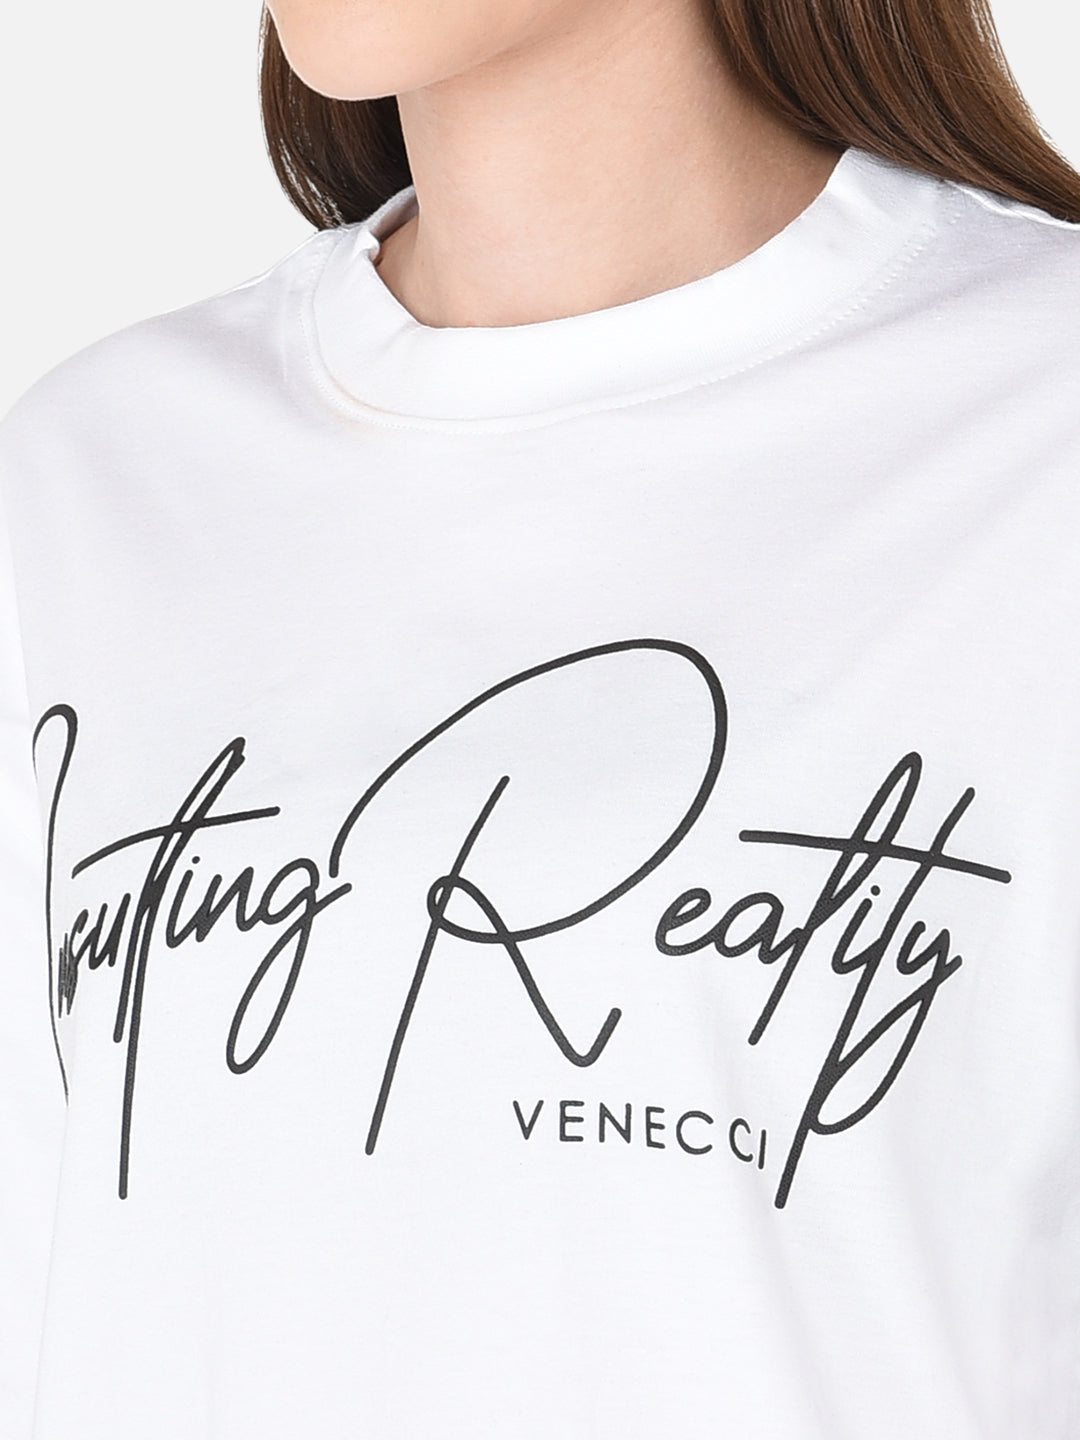 Insulting Reality T-shirt